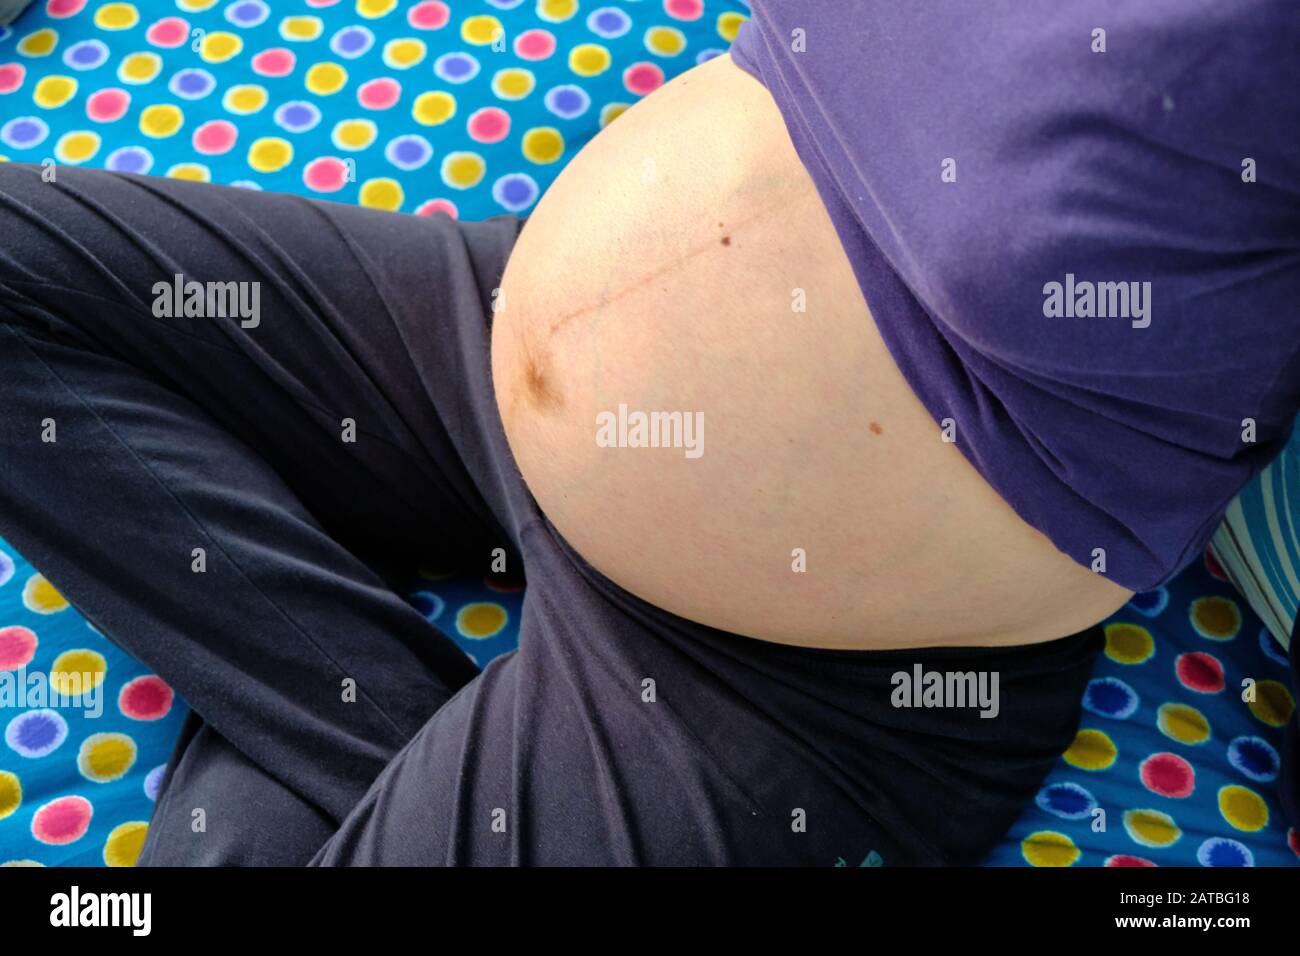 The belly of a Caucasian pregnant girl on the bed. It is visible the Linea nigra (Latin for 'black line'), often referred to as a pregnancy line. Stock Photo